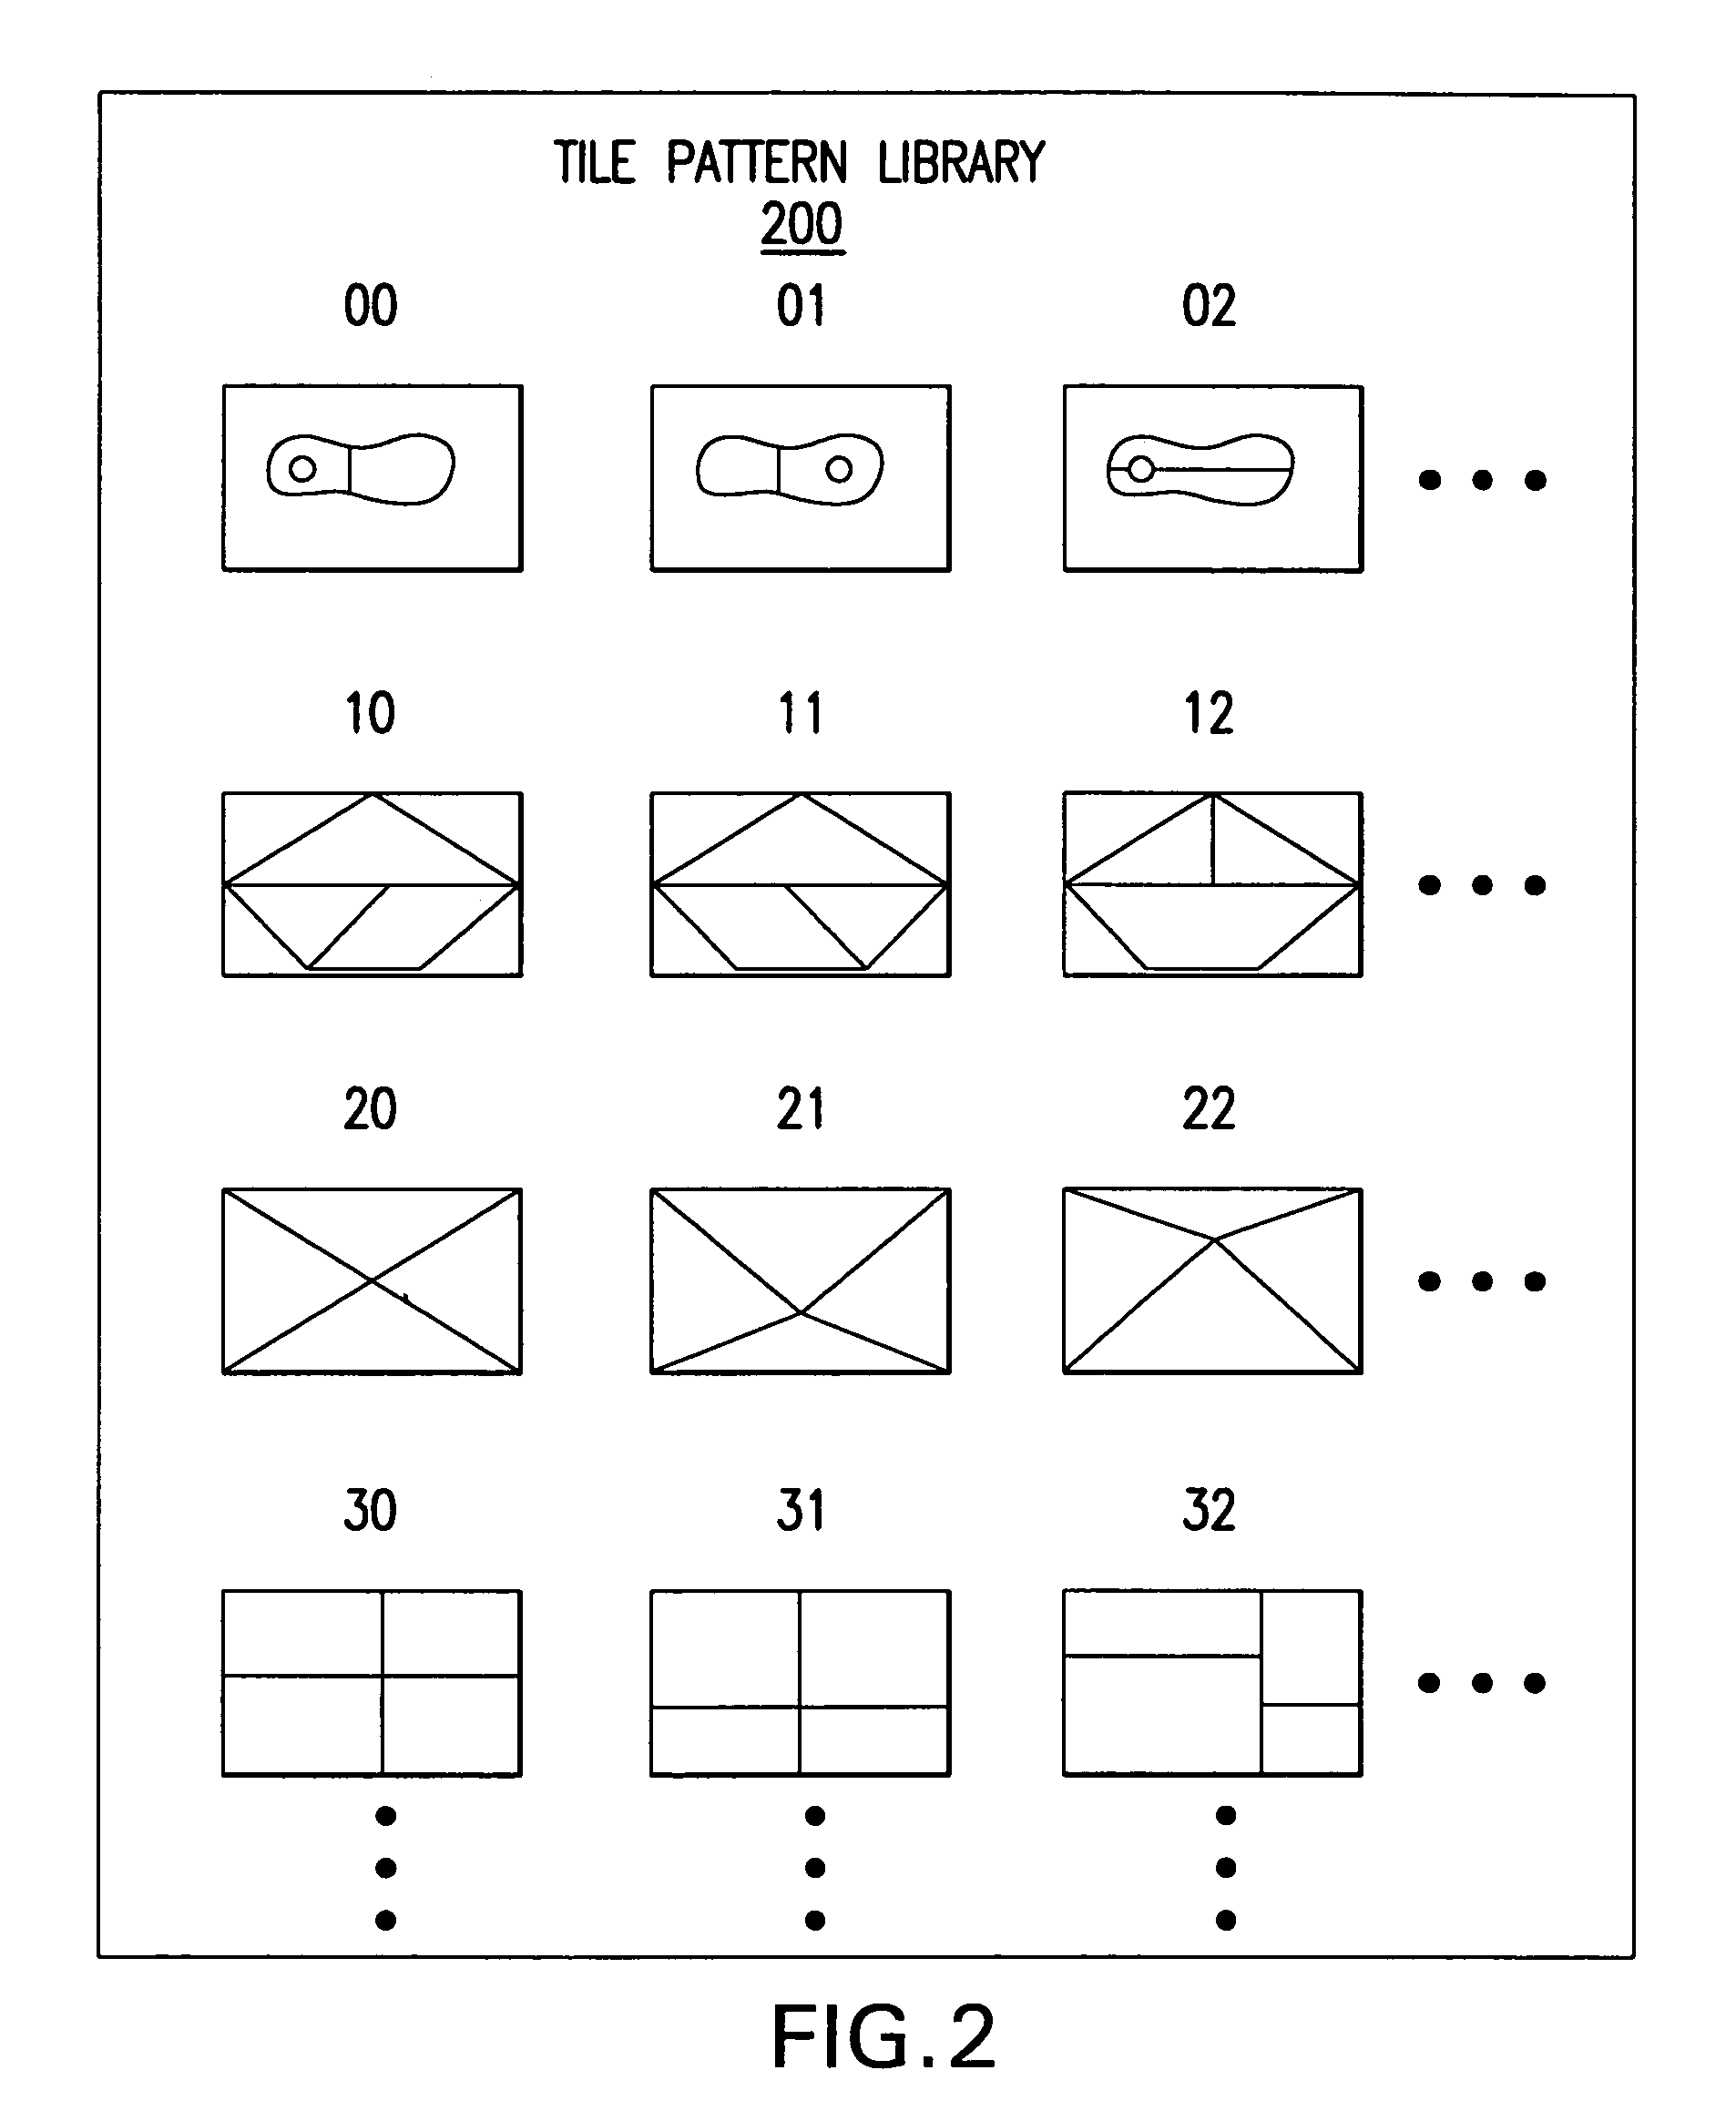 Method and system for spatially compositing digital video images with a tile pattern library